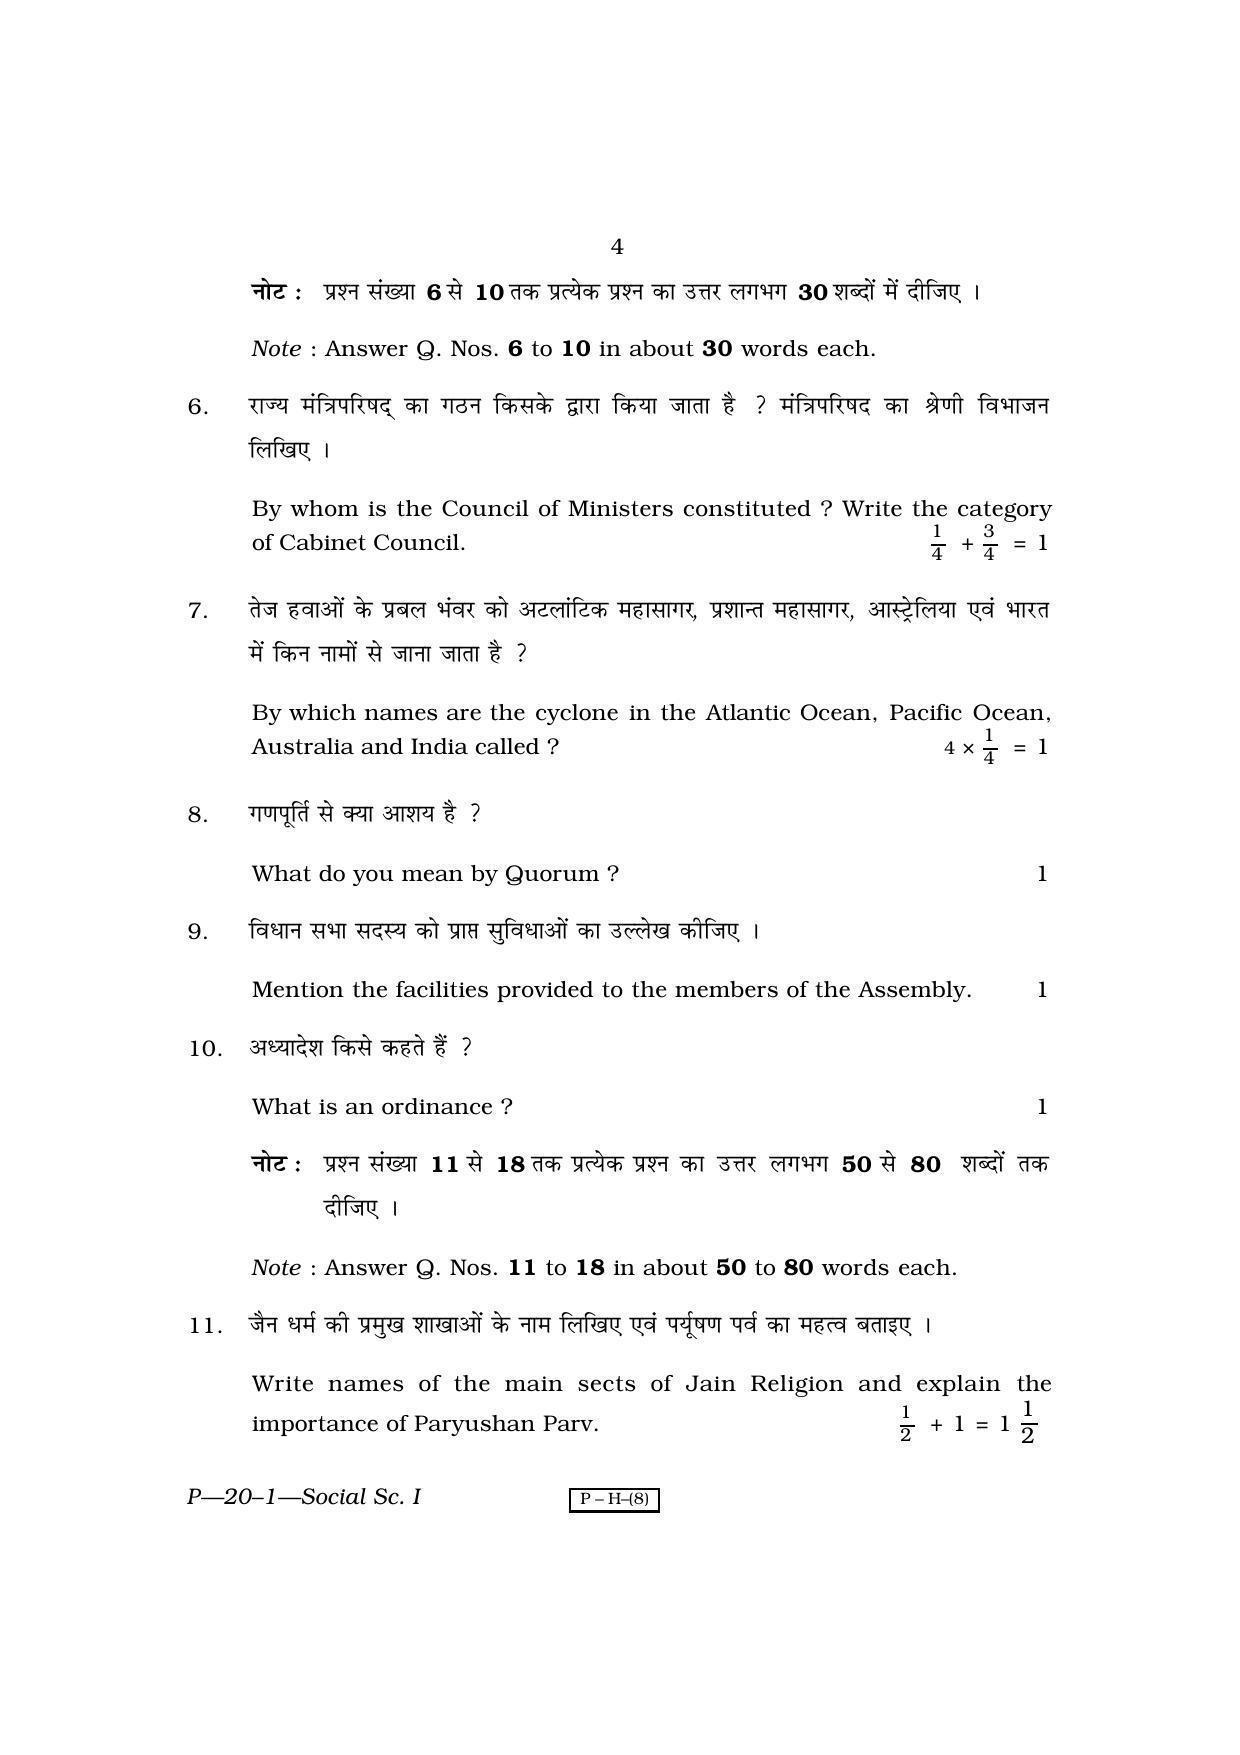 RBSE 2010 Social Science I Praveshika Question Paper - Page 4